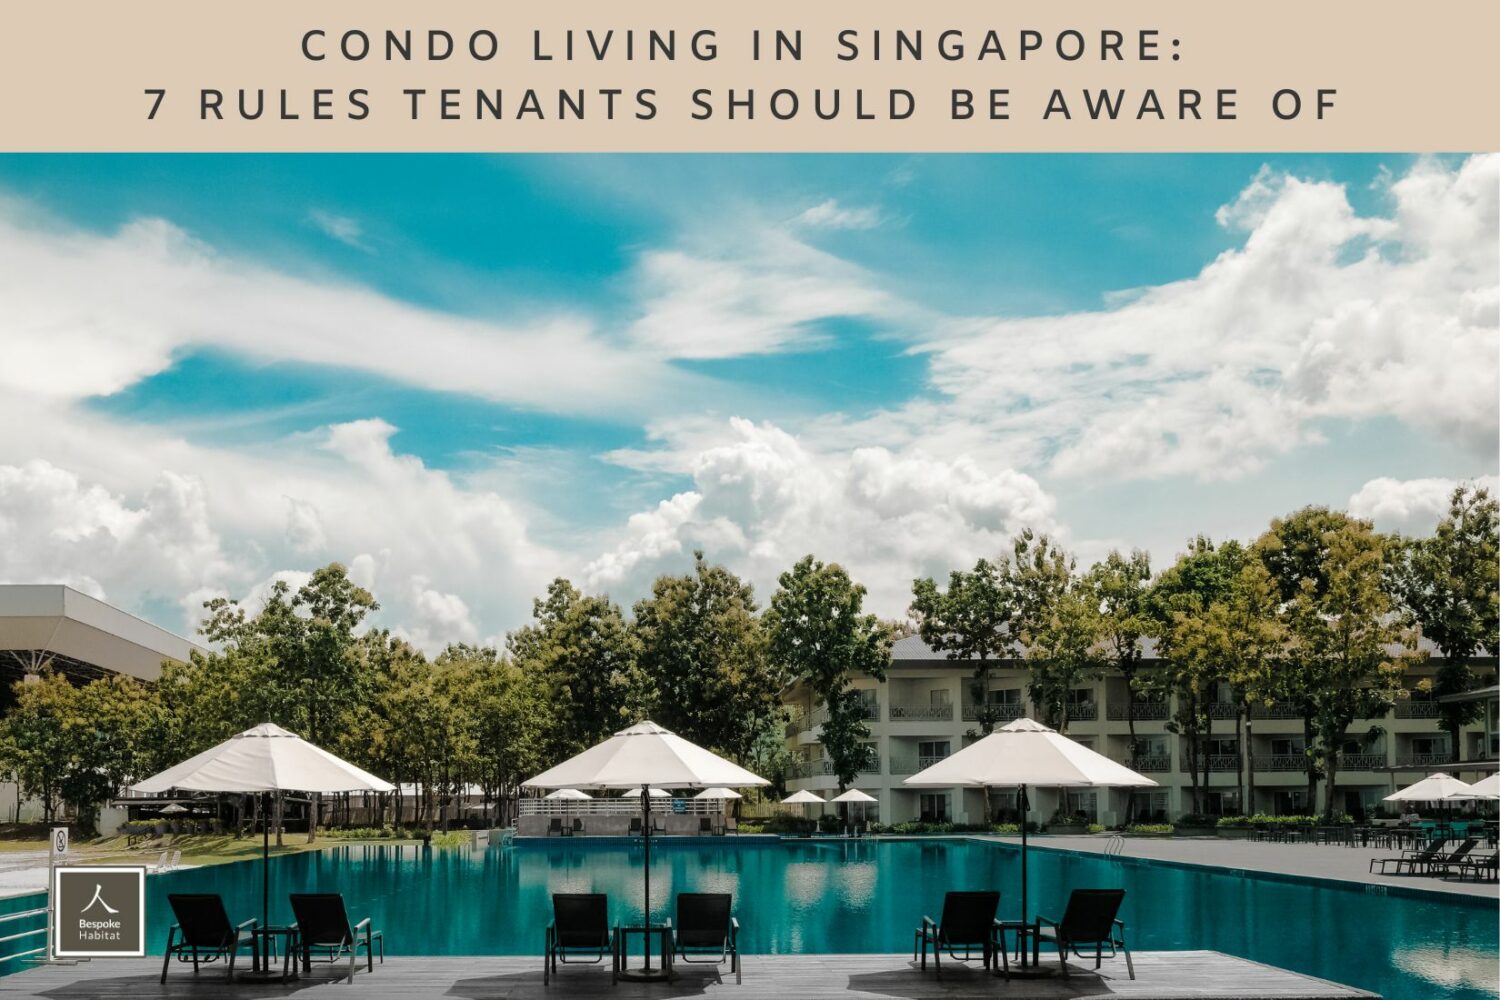 Condo living in Singapore 7 rules tenants should be aware of